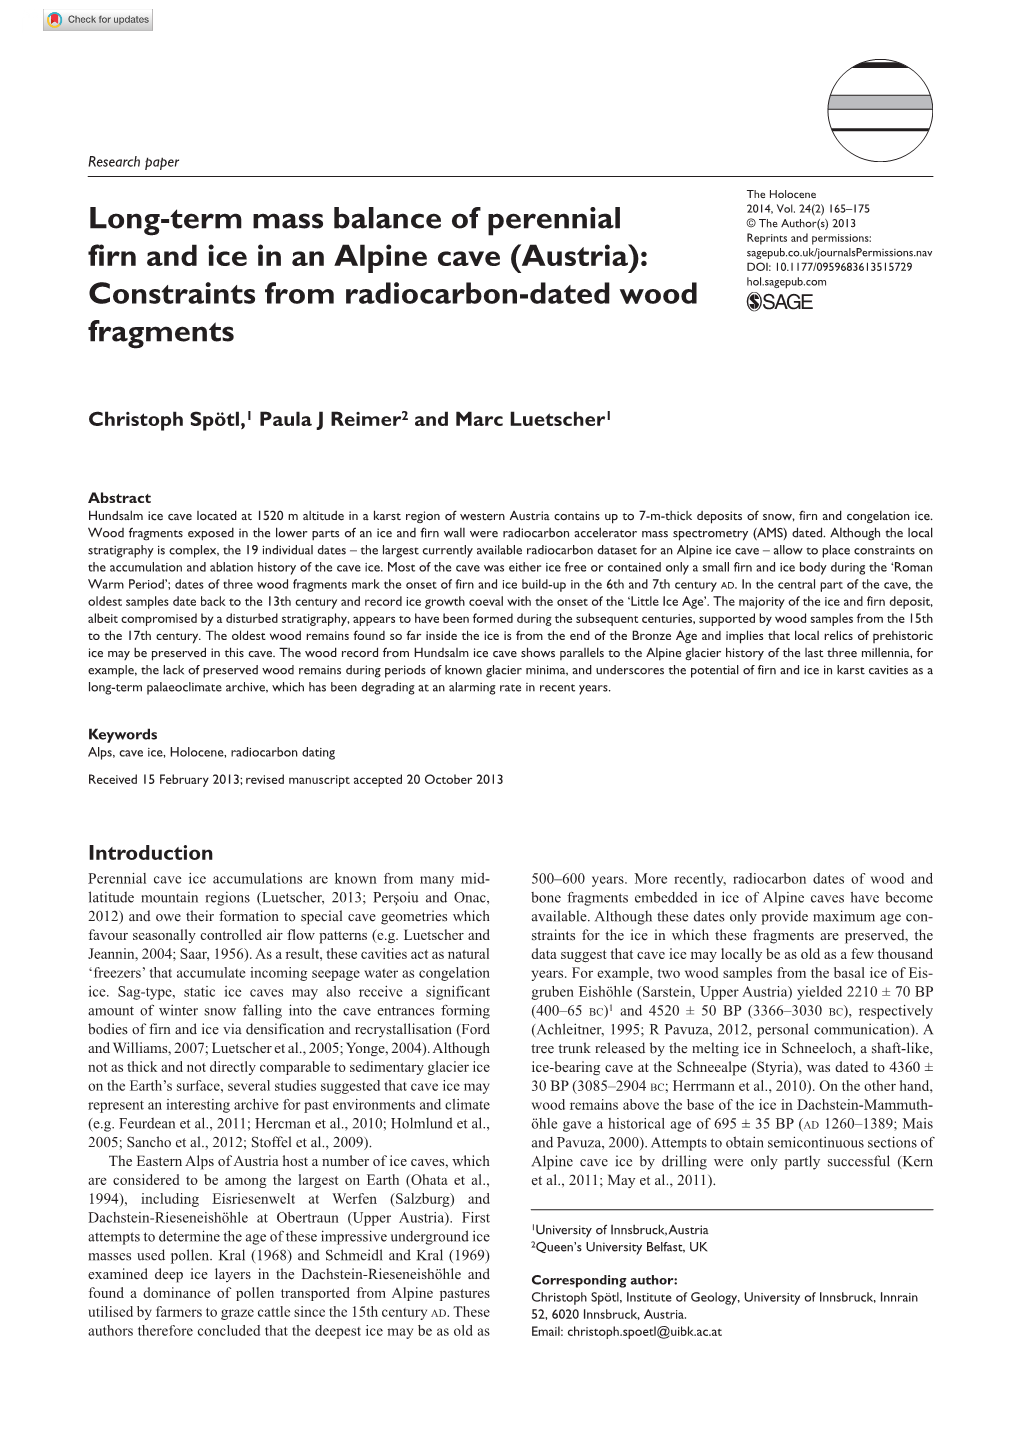 Long-Term Mass Balance of Perennial Firn and Ice in an Alpine Cave (Austria): Constraints from Radiocarbon-Dated Wood Fragments